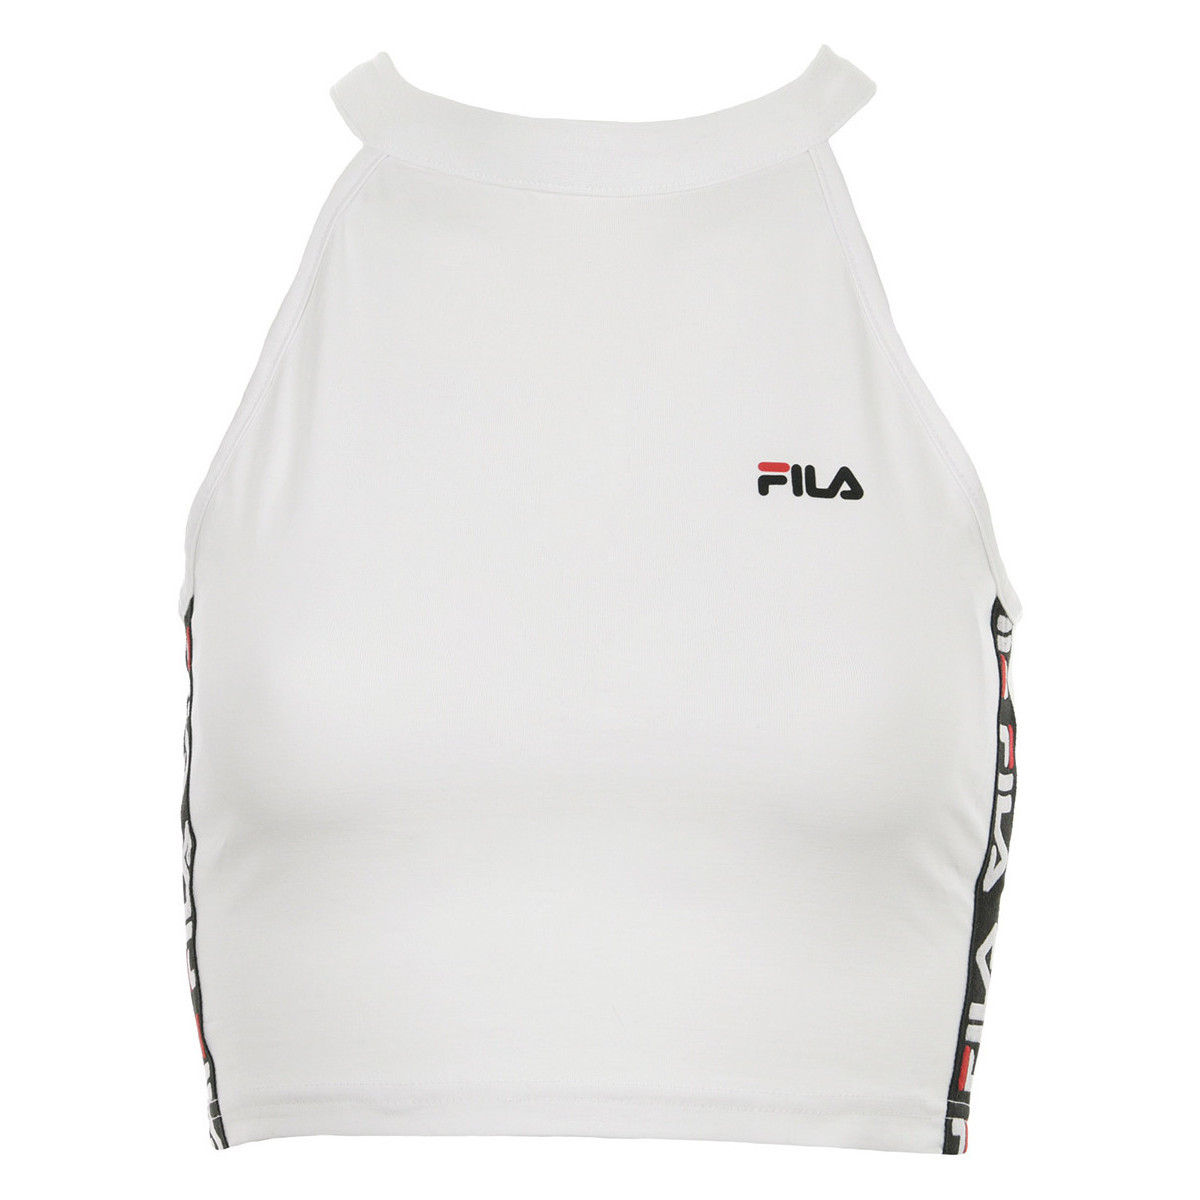 Textiel Dames Mouwloze tops Fila Wn's Melody Cropped Top Wit